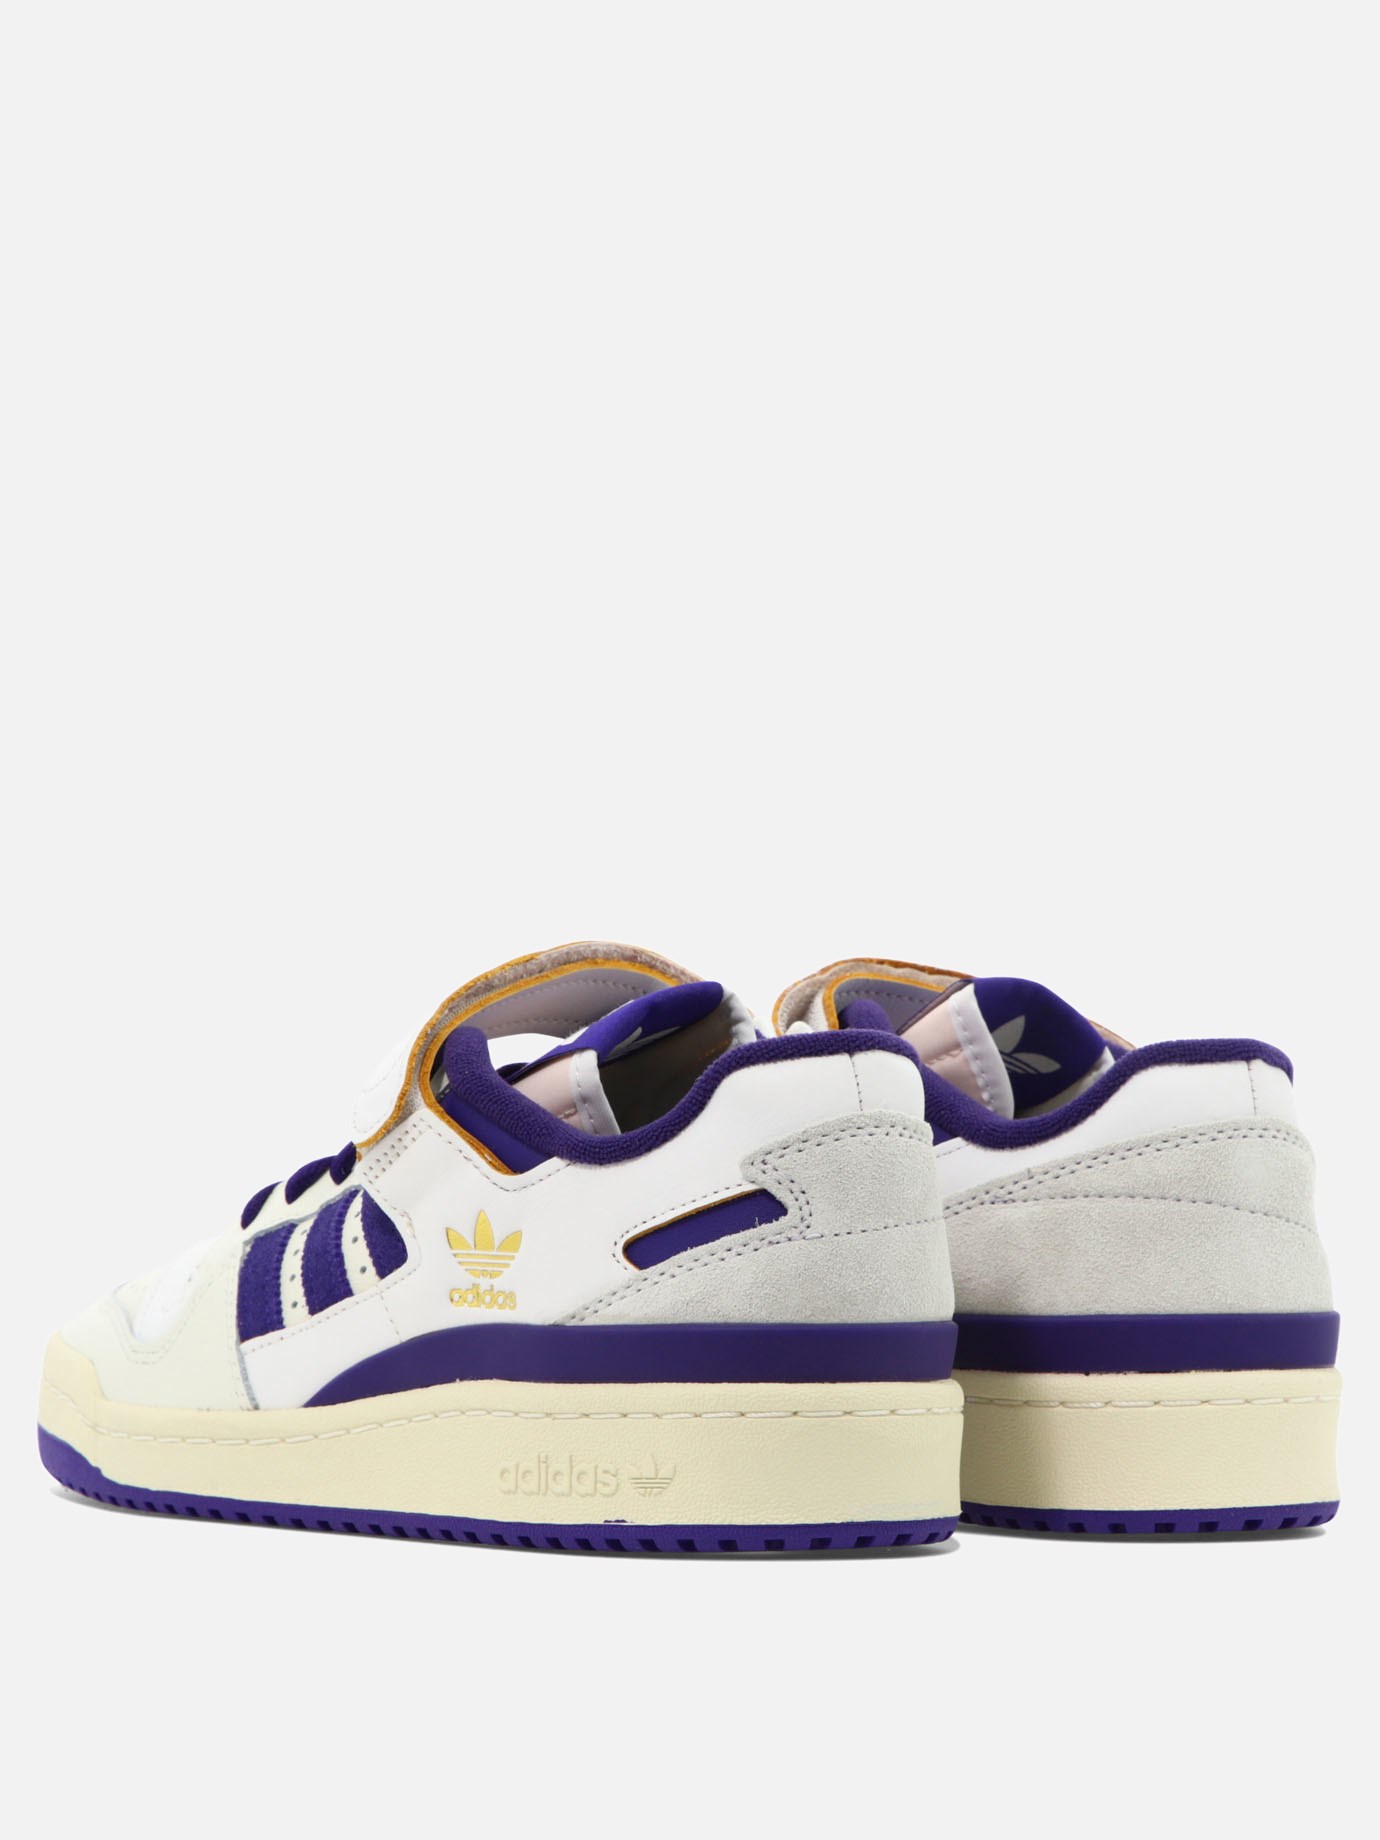 Sneaker  Forum 84 Low  by Adidas